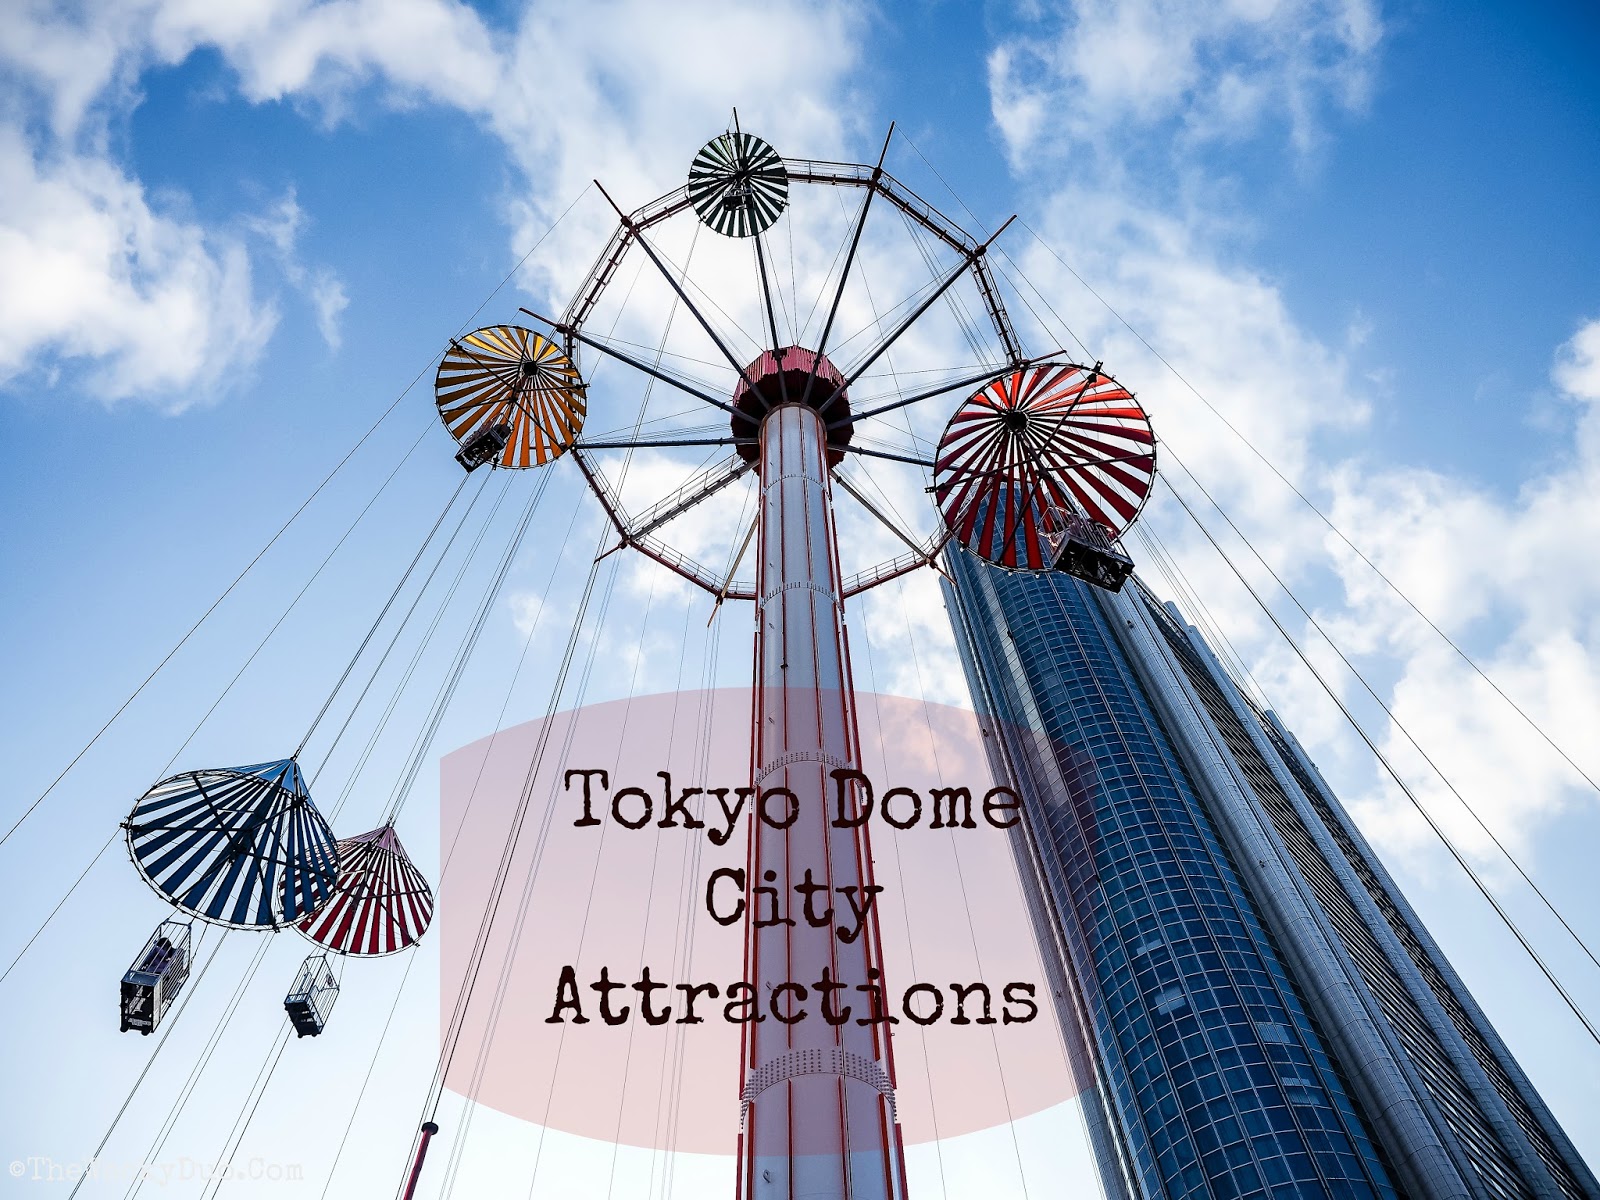 Tokyo Travel Blog Tokyo Dome City Attractions Review The Wacky Duo 